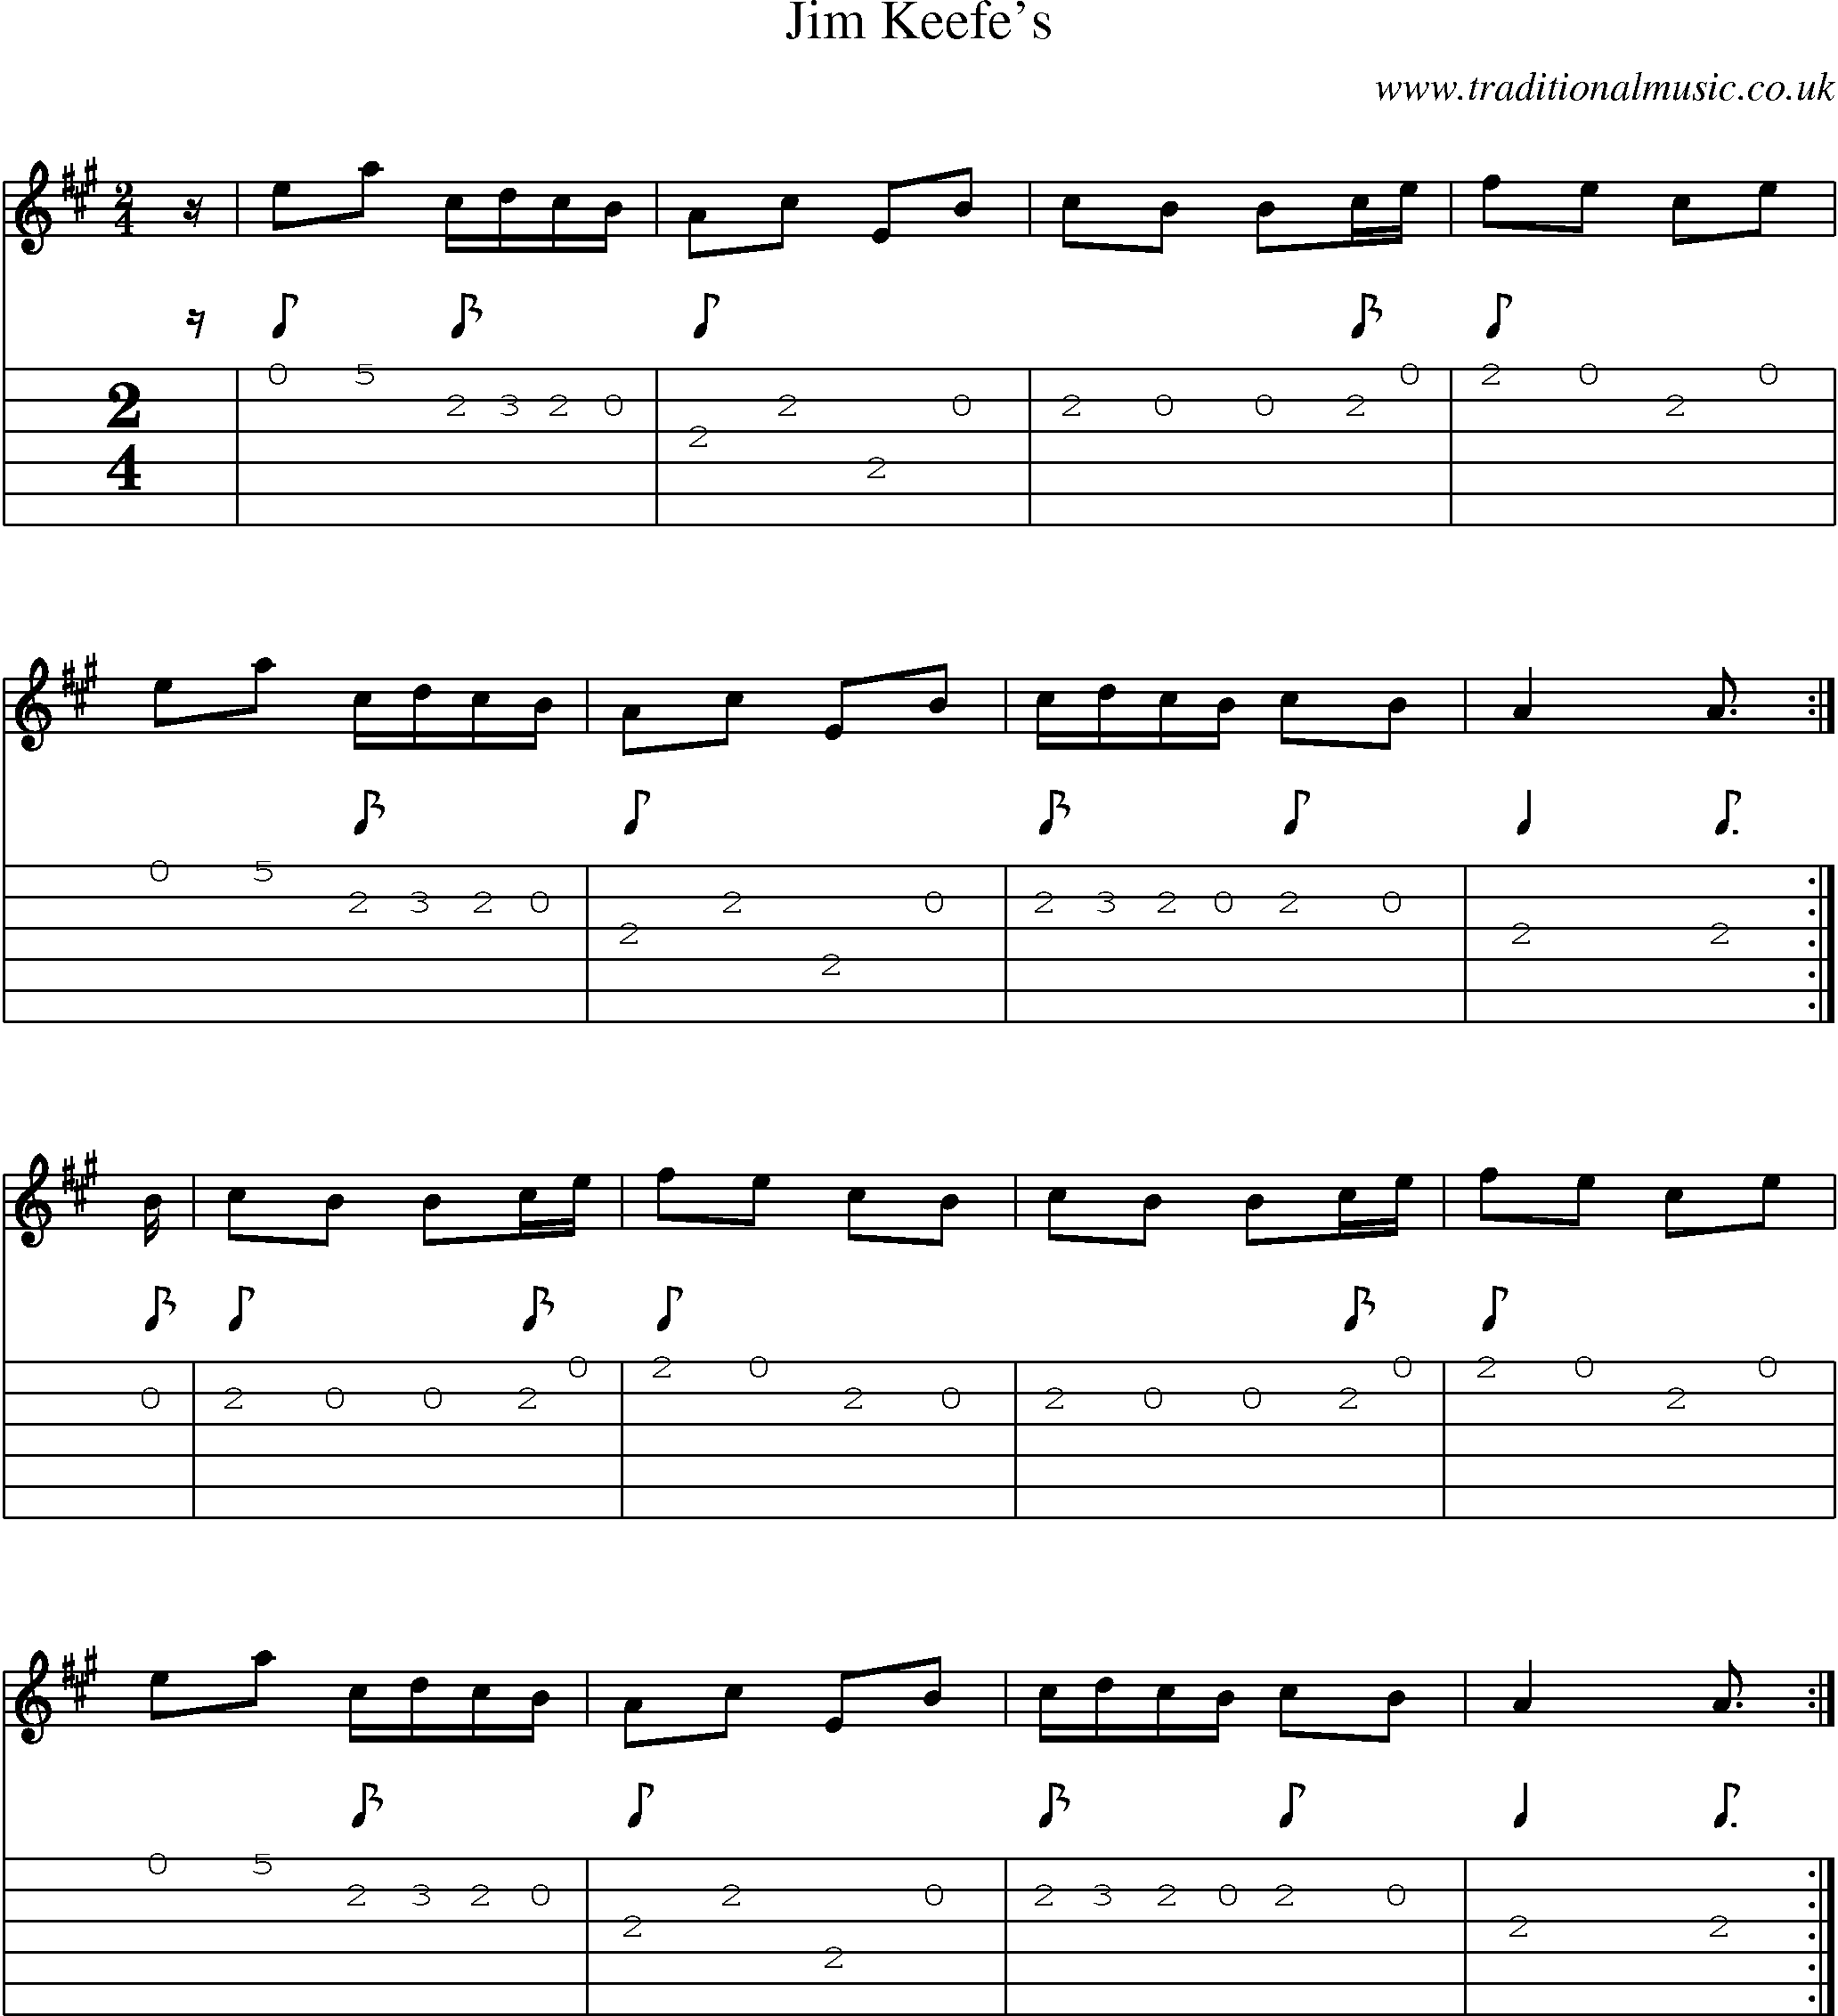 Music Score and Guitar Tabs for Jim Keefes